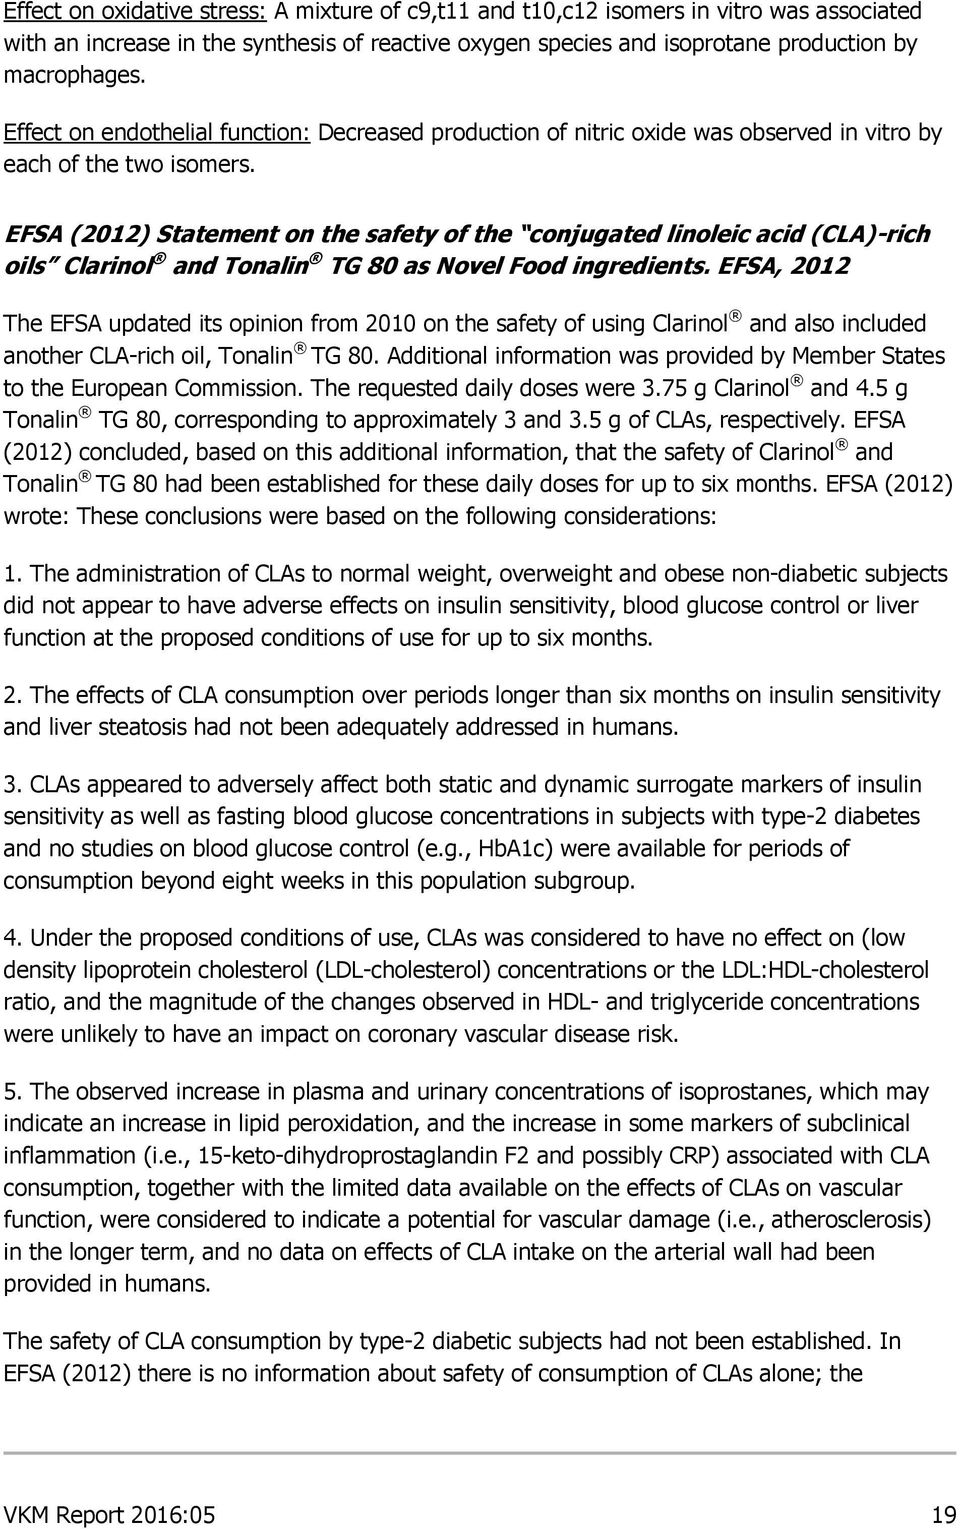 EFSA (2012) Statement on the safety of the conjugated linoleic acid (CLA)-rich oils Clarinol and Tonalin TG 80 as Novel Food ingredients.